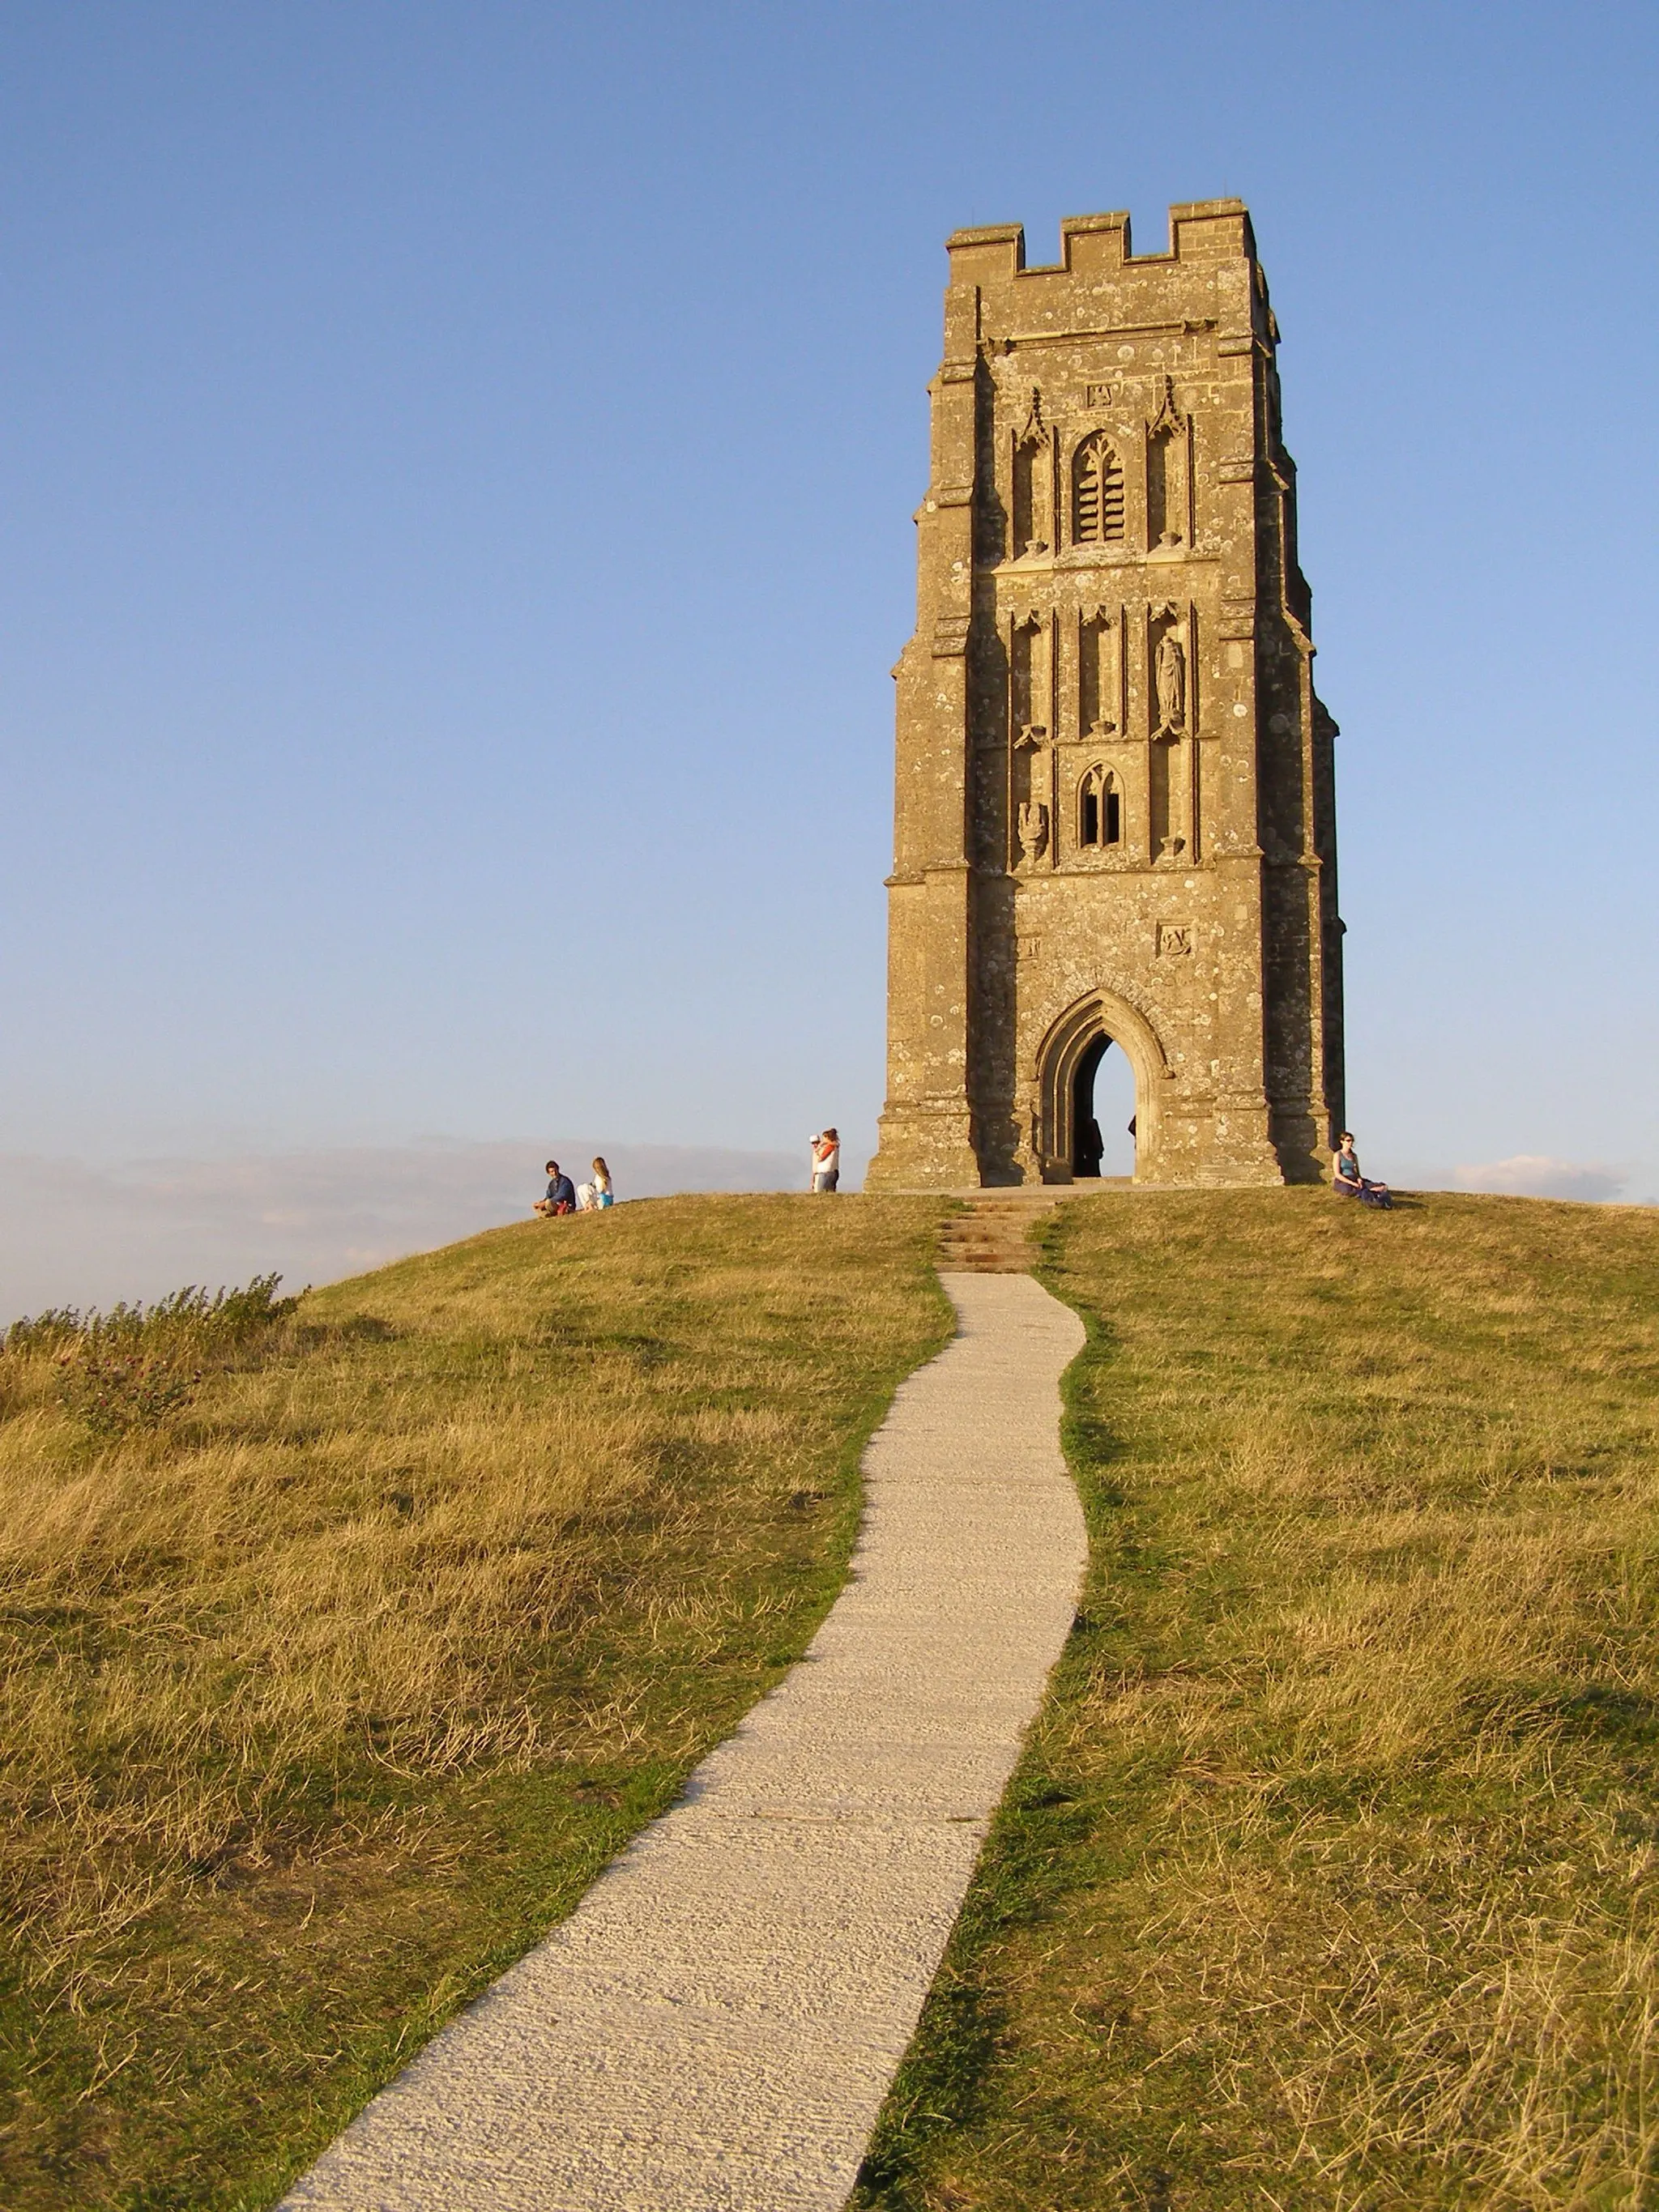 Photo showing: Approaching the summit of Glastonbury Tor, with the ruined (and restored) St Michael's church tower